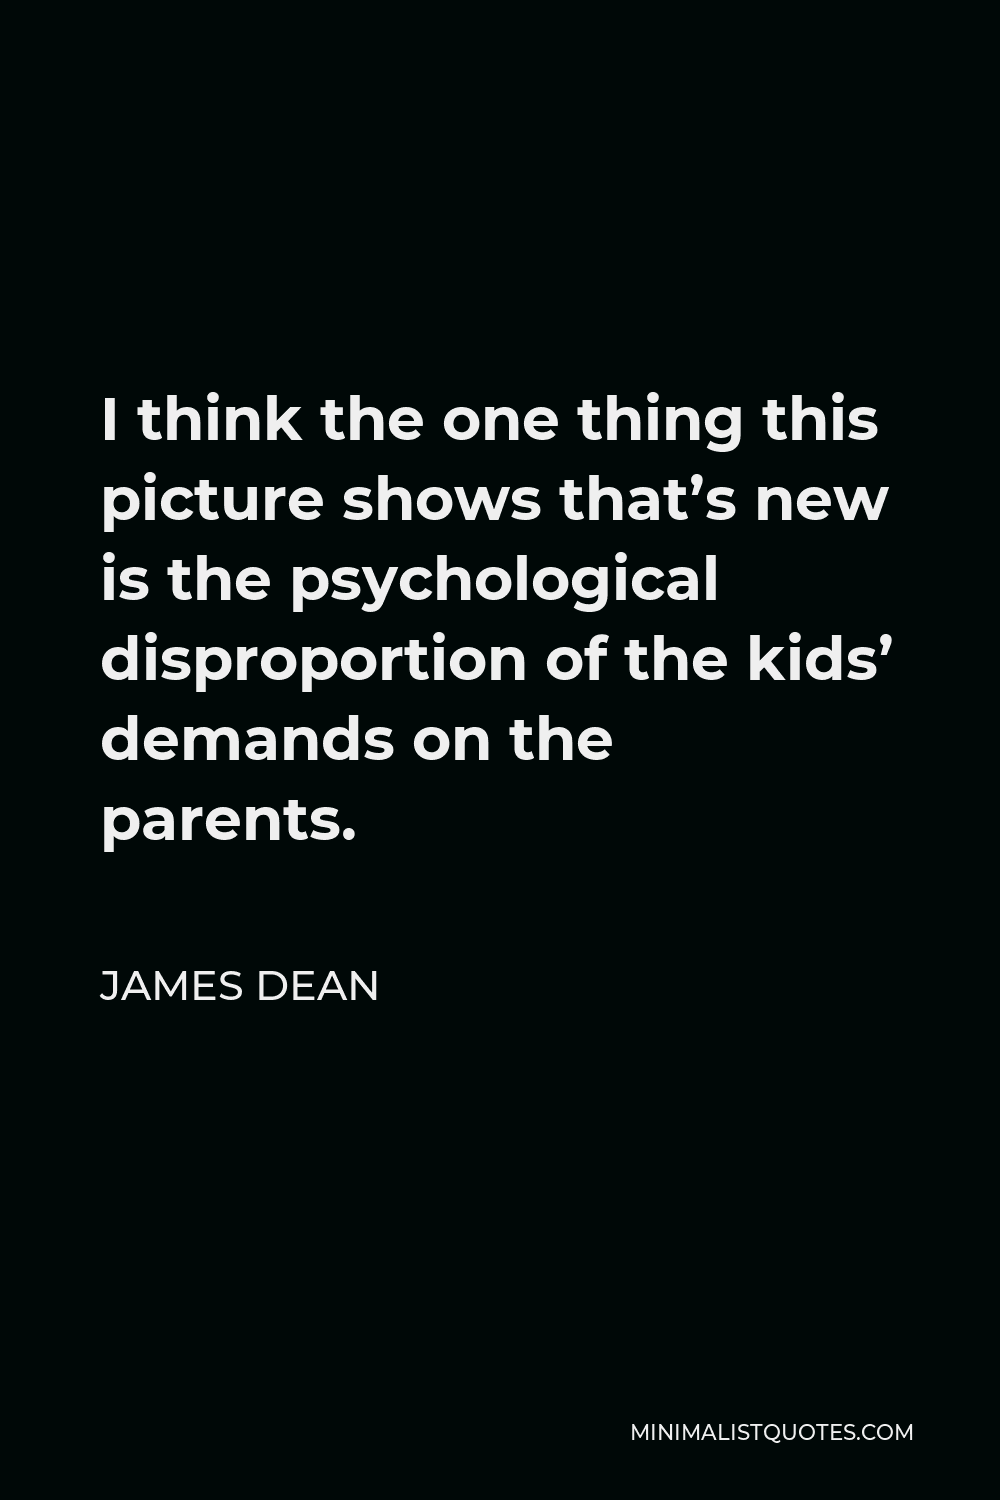 James Dean Quote - I think the one thing this picture shows that’s new is the psychological disproportion of the kids’ demands on the parents.